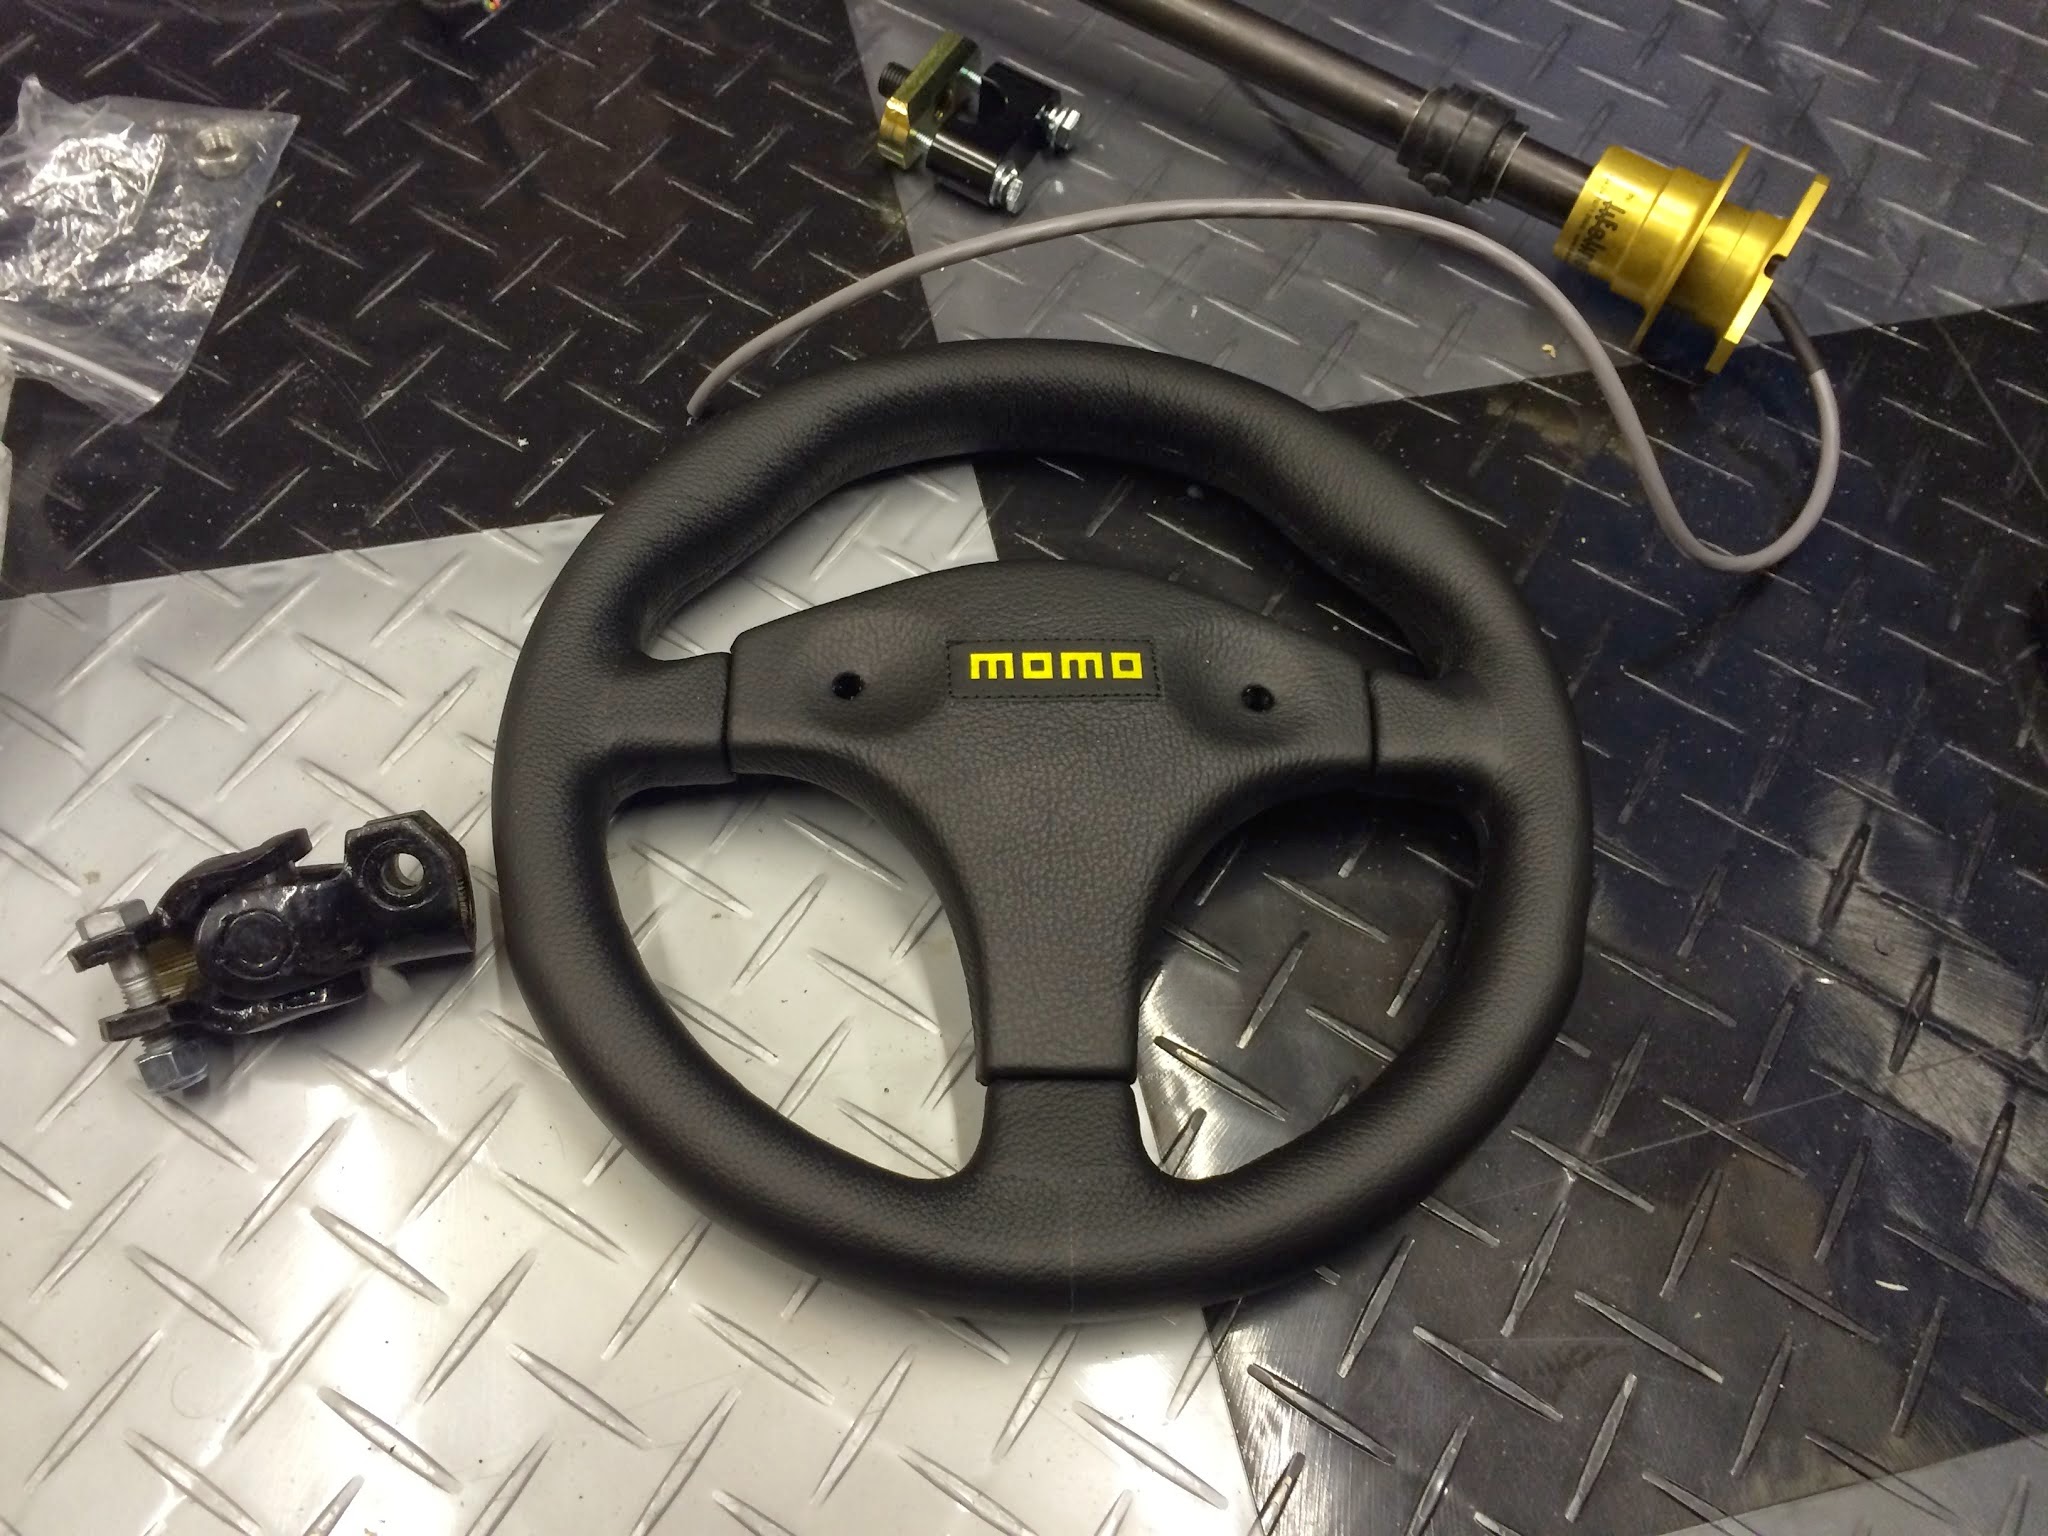 Steering wheel, UJ, upper column with quick release boss and clamp plate.